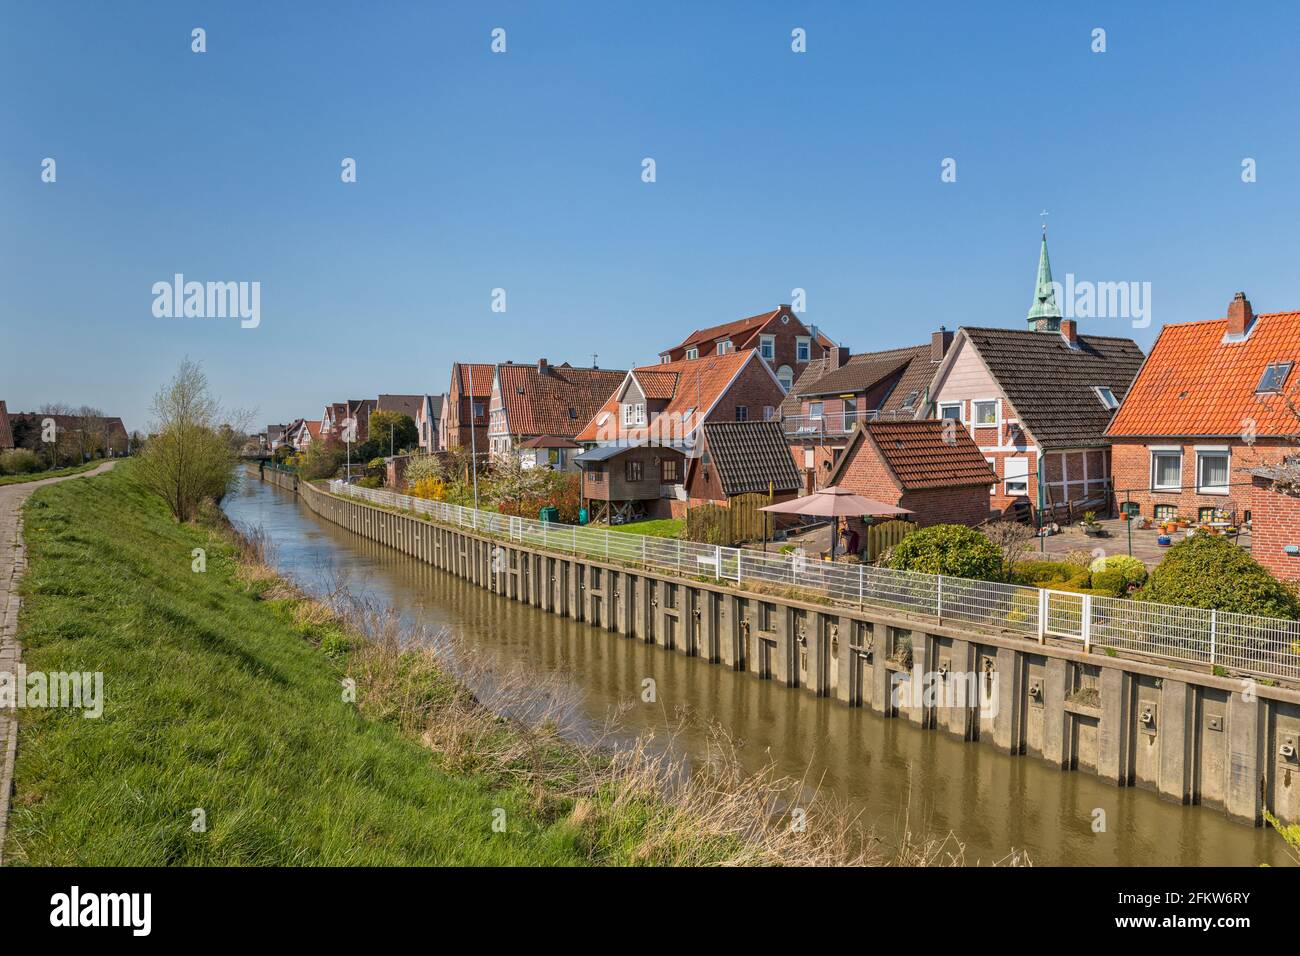 Lühe river flowing through the village of Steinkirchen in the Altes land region of Lower Saxony, Gemany Stock Photo